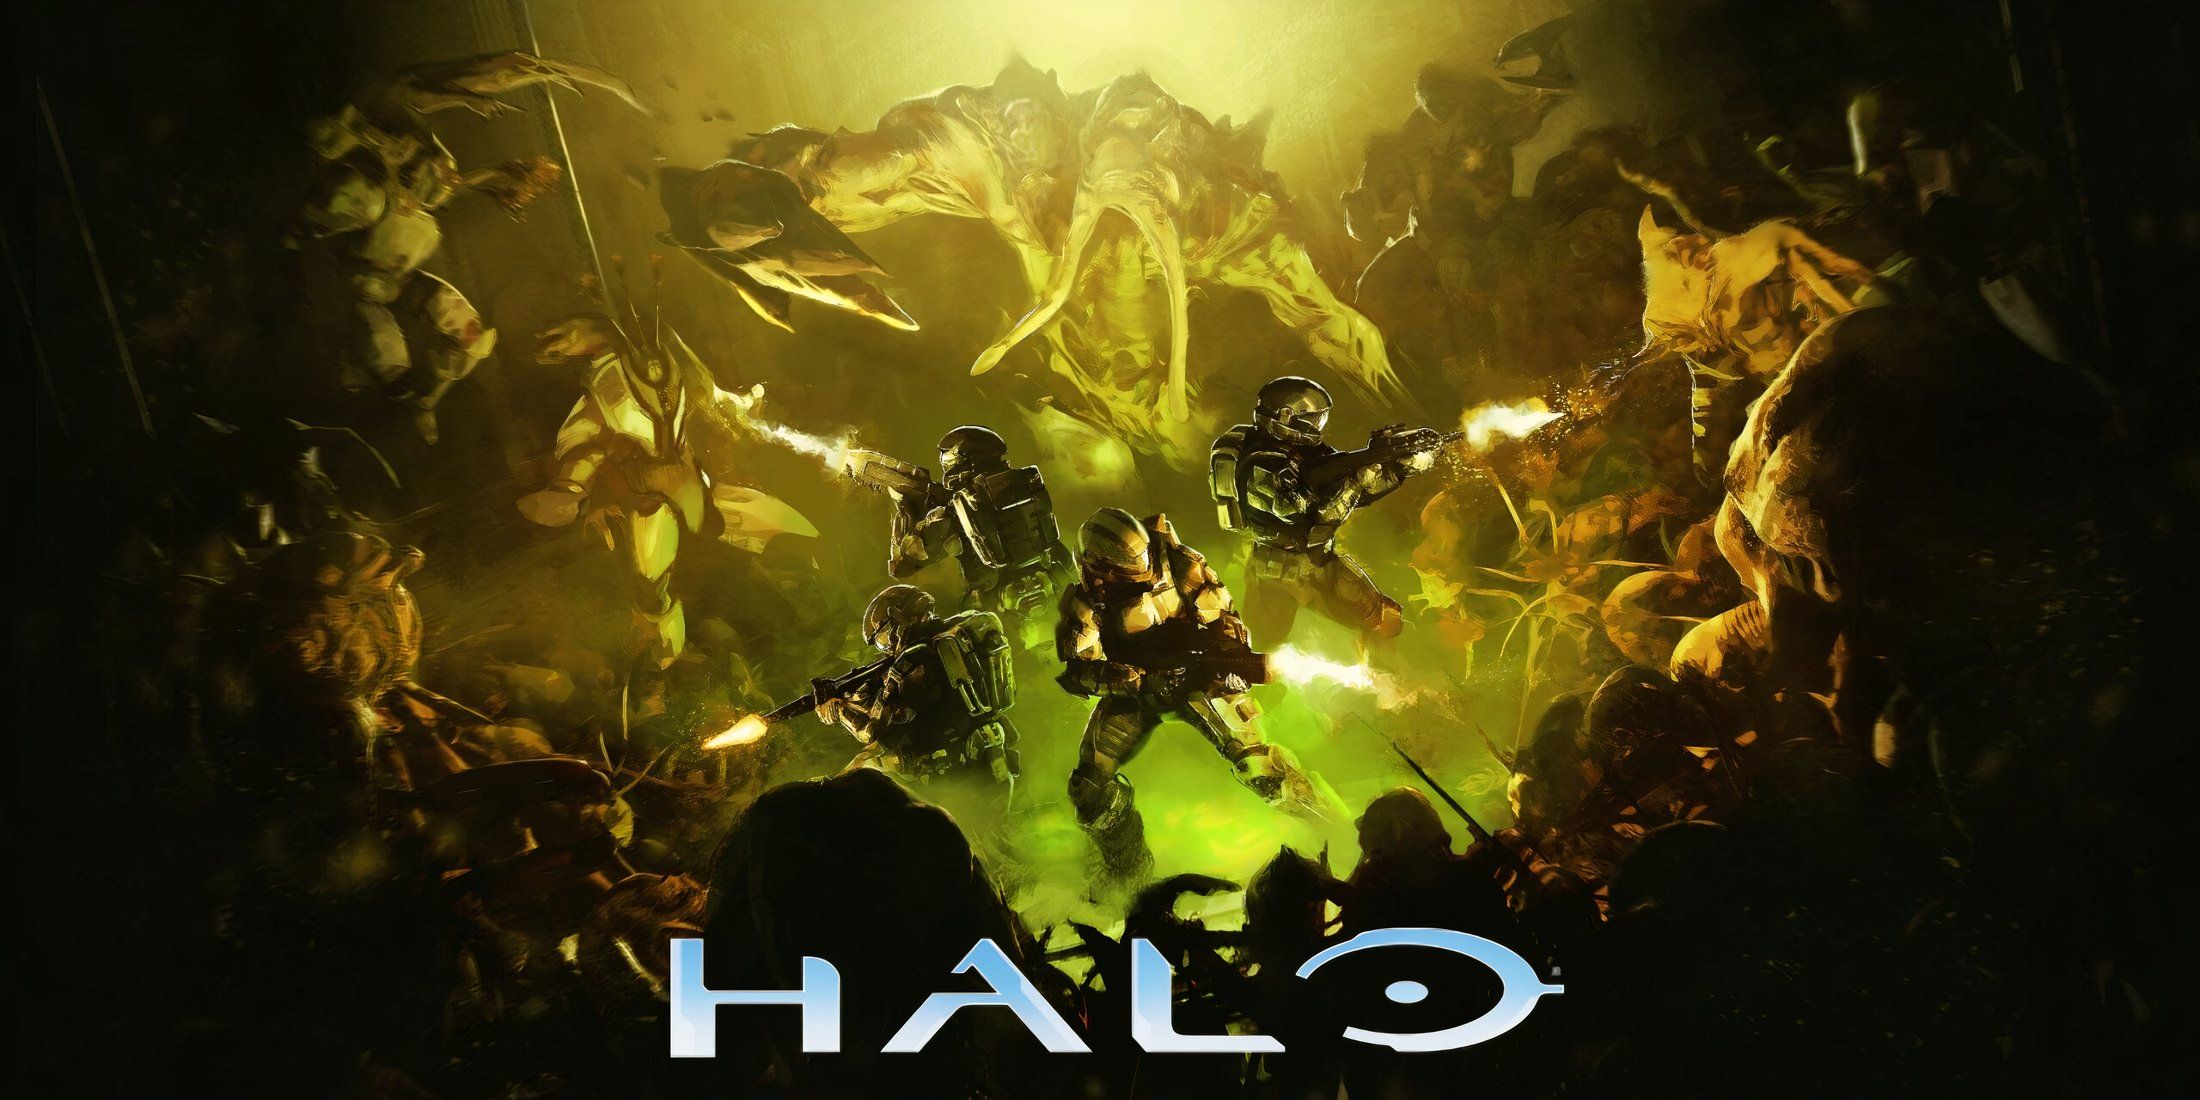 Halo's Next Game Can Truly Shine If It Rips Off a Horror Band-Aid